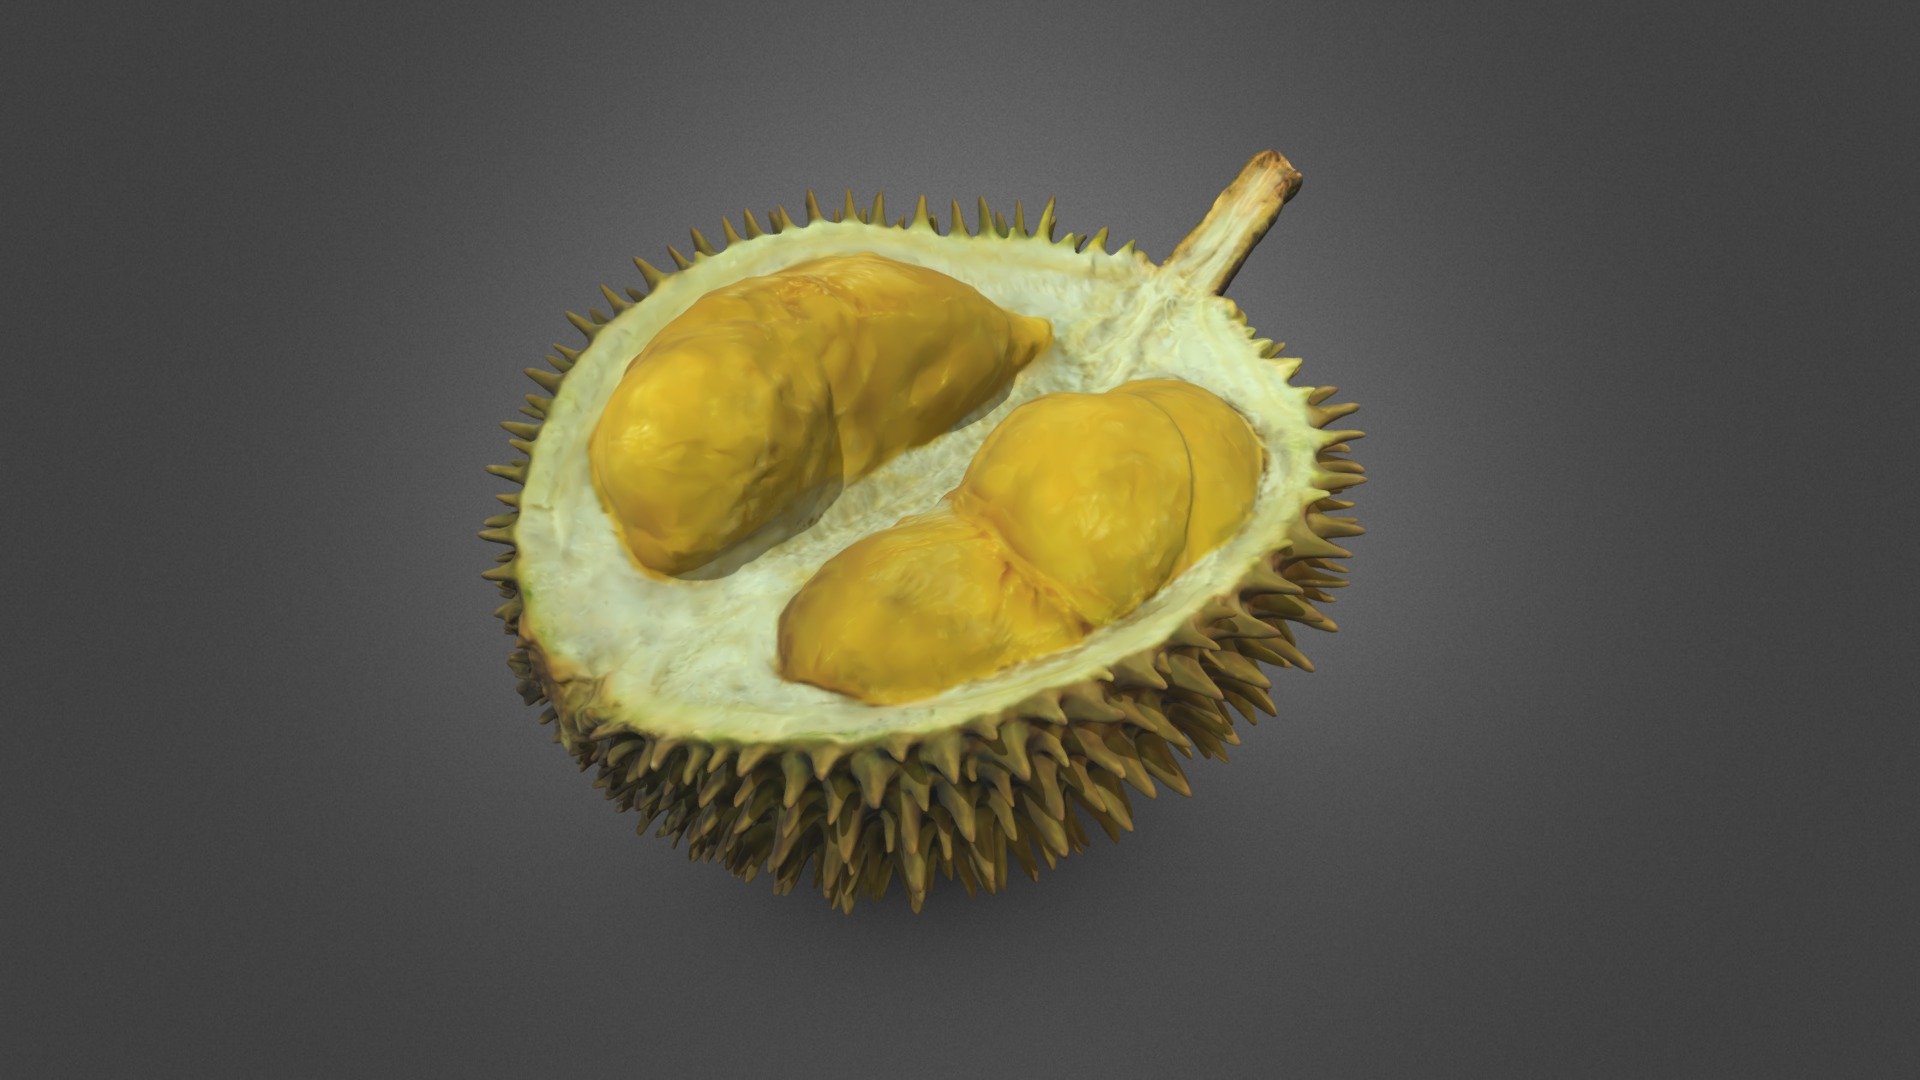 Durian is a unique tropical fruit. It’s popular in Southeast Asia, where it’s nicknamed “the king of fruits.” Durian is very high in nutrients, containing more than most other fruits. However, it also gets a bad rap due to its strong smell. Durian is a tropical fruit distinguished by its large size and spiky, hard outer shell. It has a smelly, custard-like flesh with large seeds. Durian grows in tropical regions around the world, particularly in the Southeast Asian countries of Malaysia, Indonesia, and Thailand 3d model